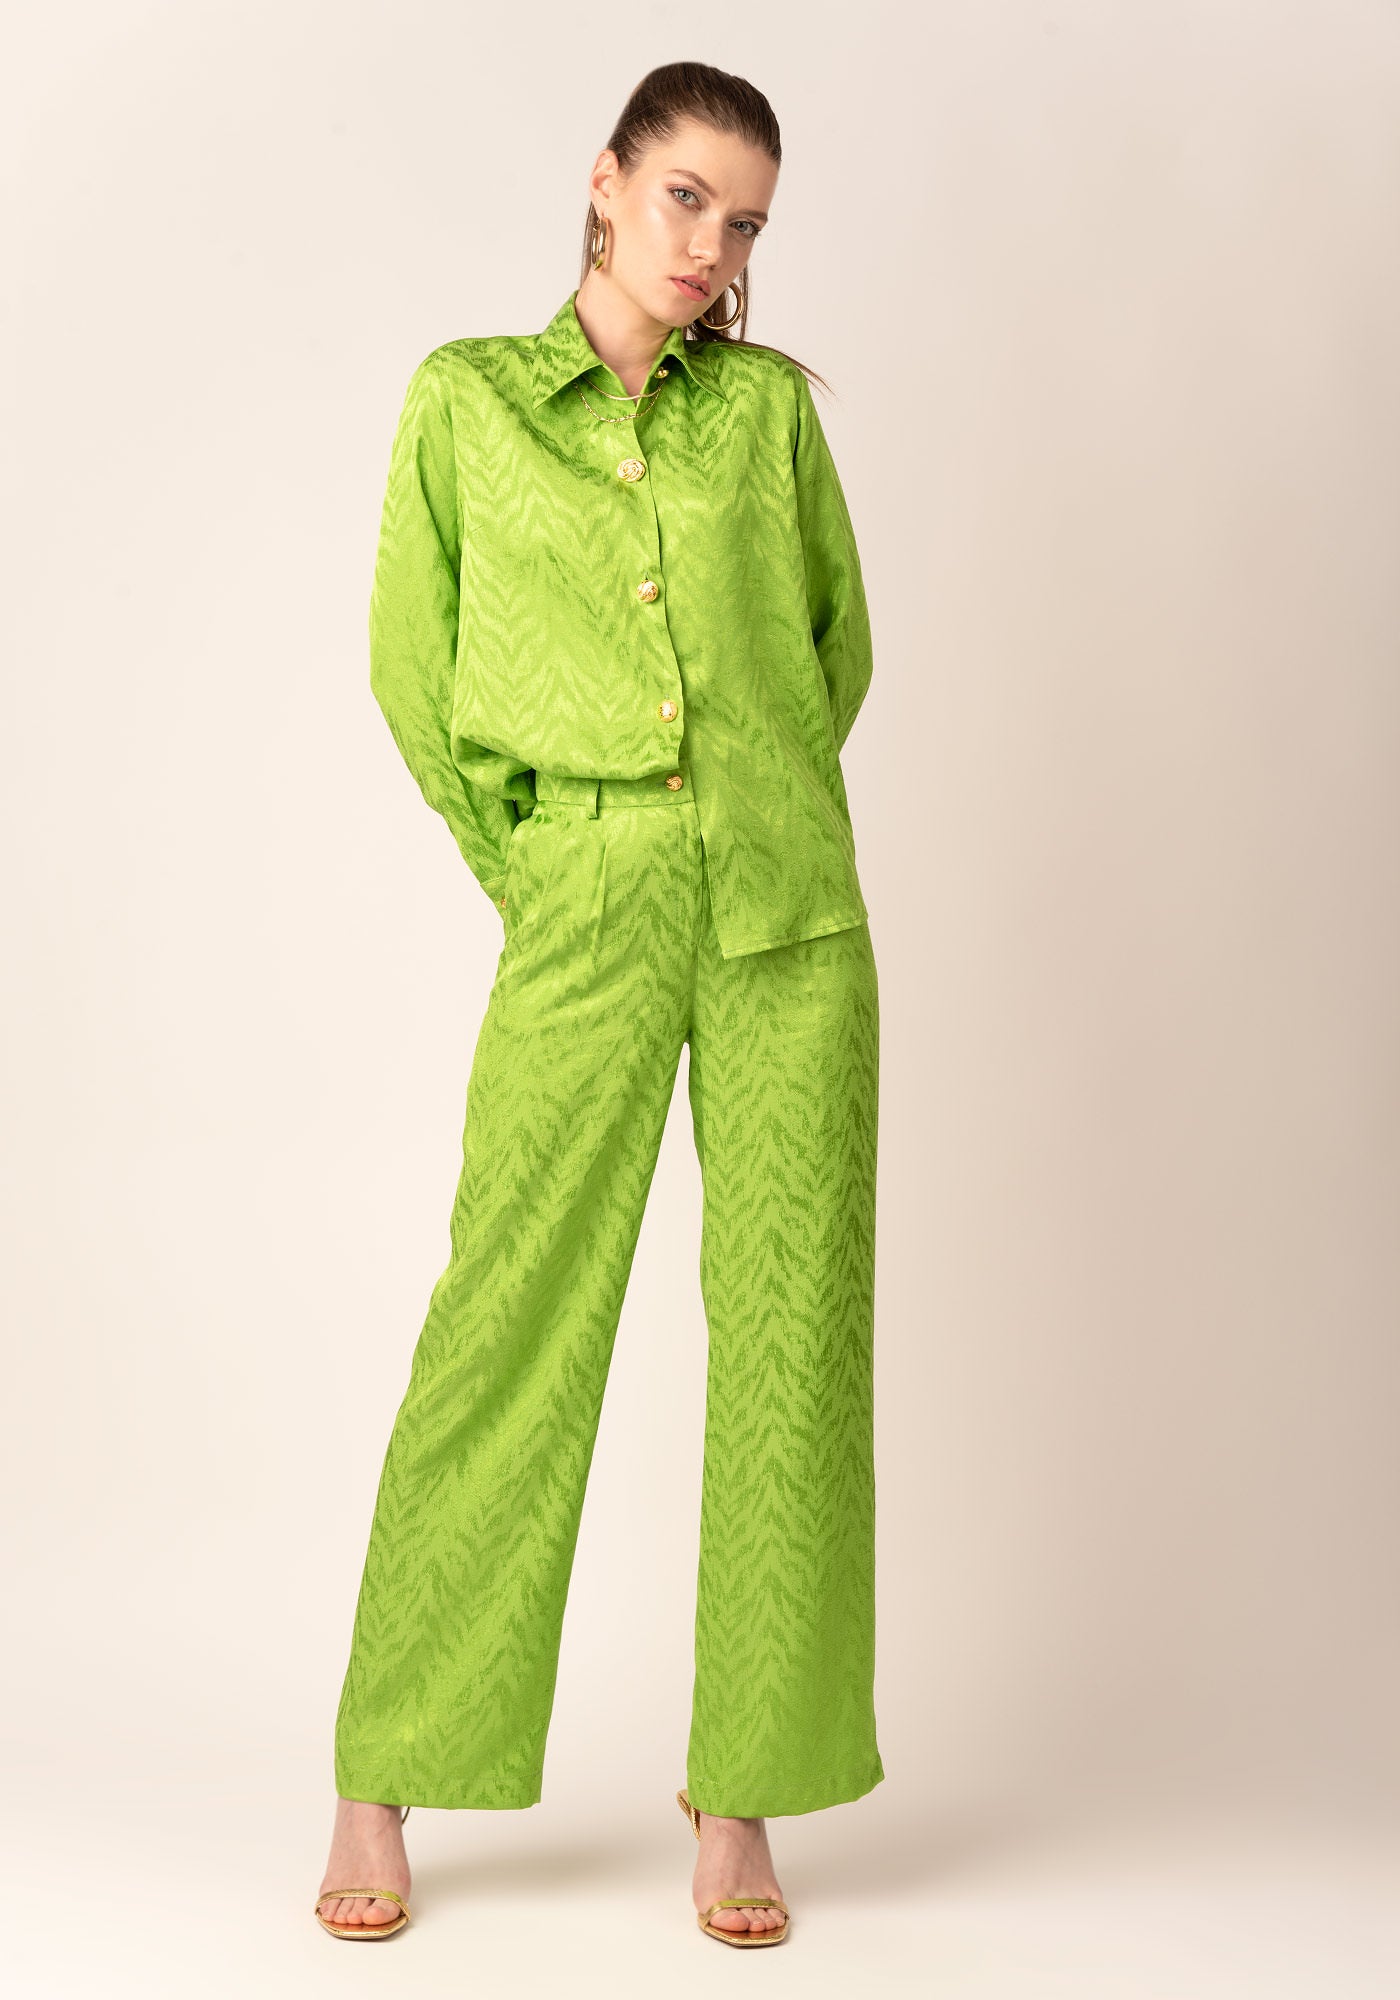 Women's Straight Leg Occasion Pant in Apple Green